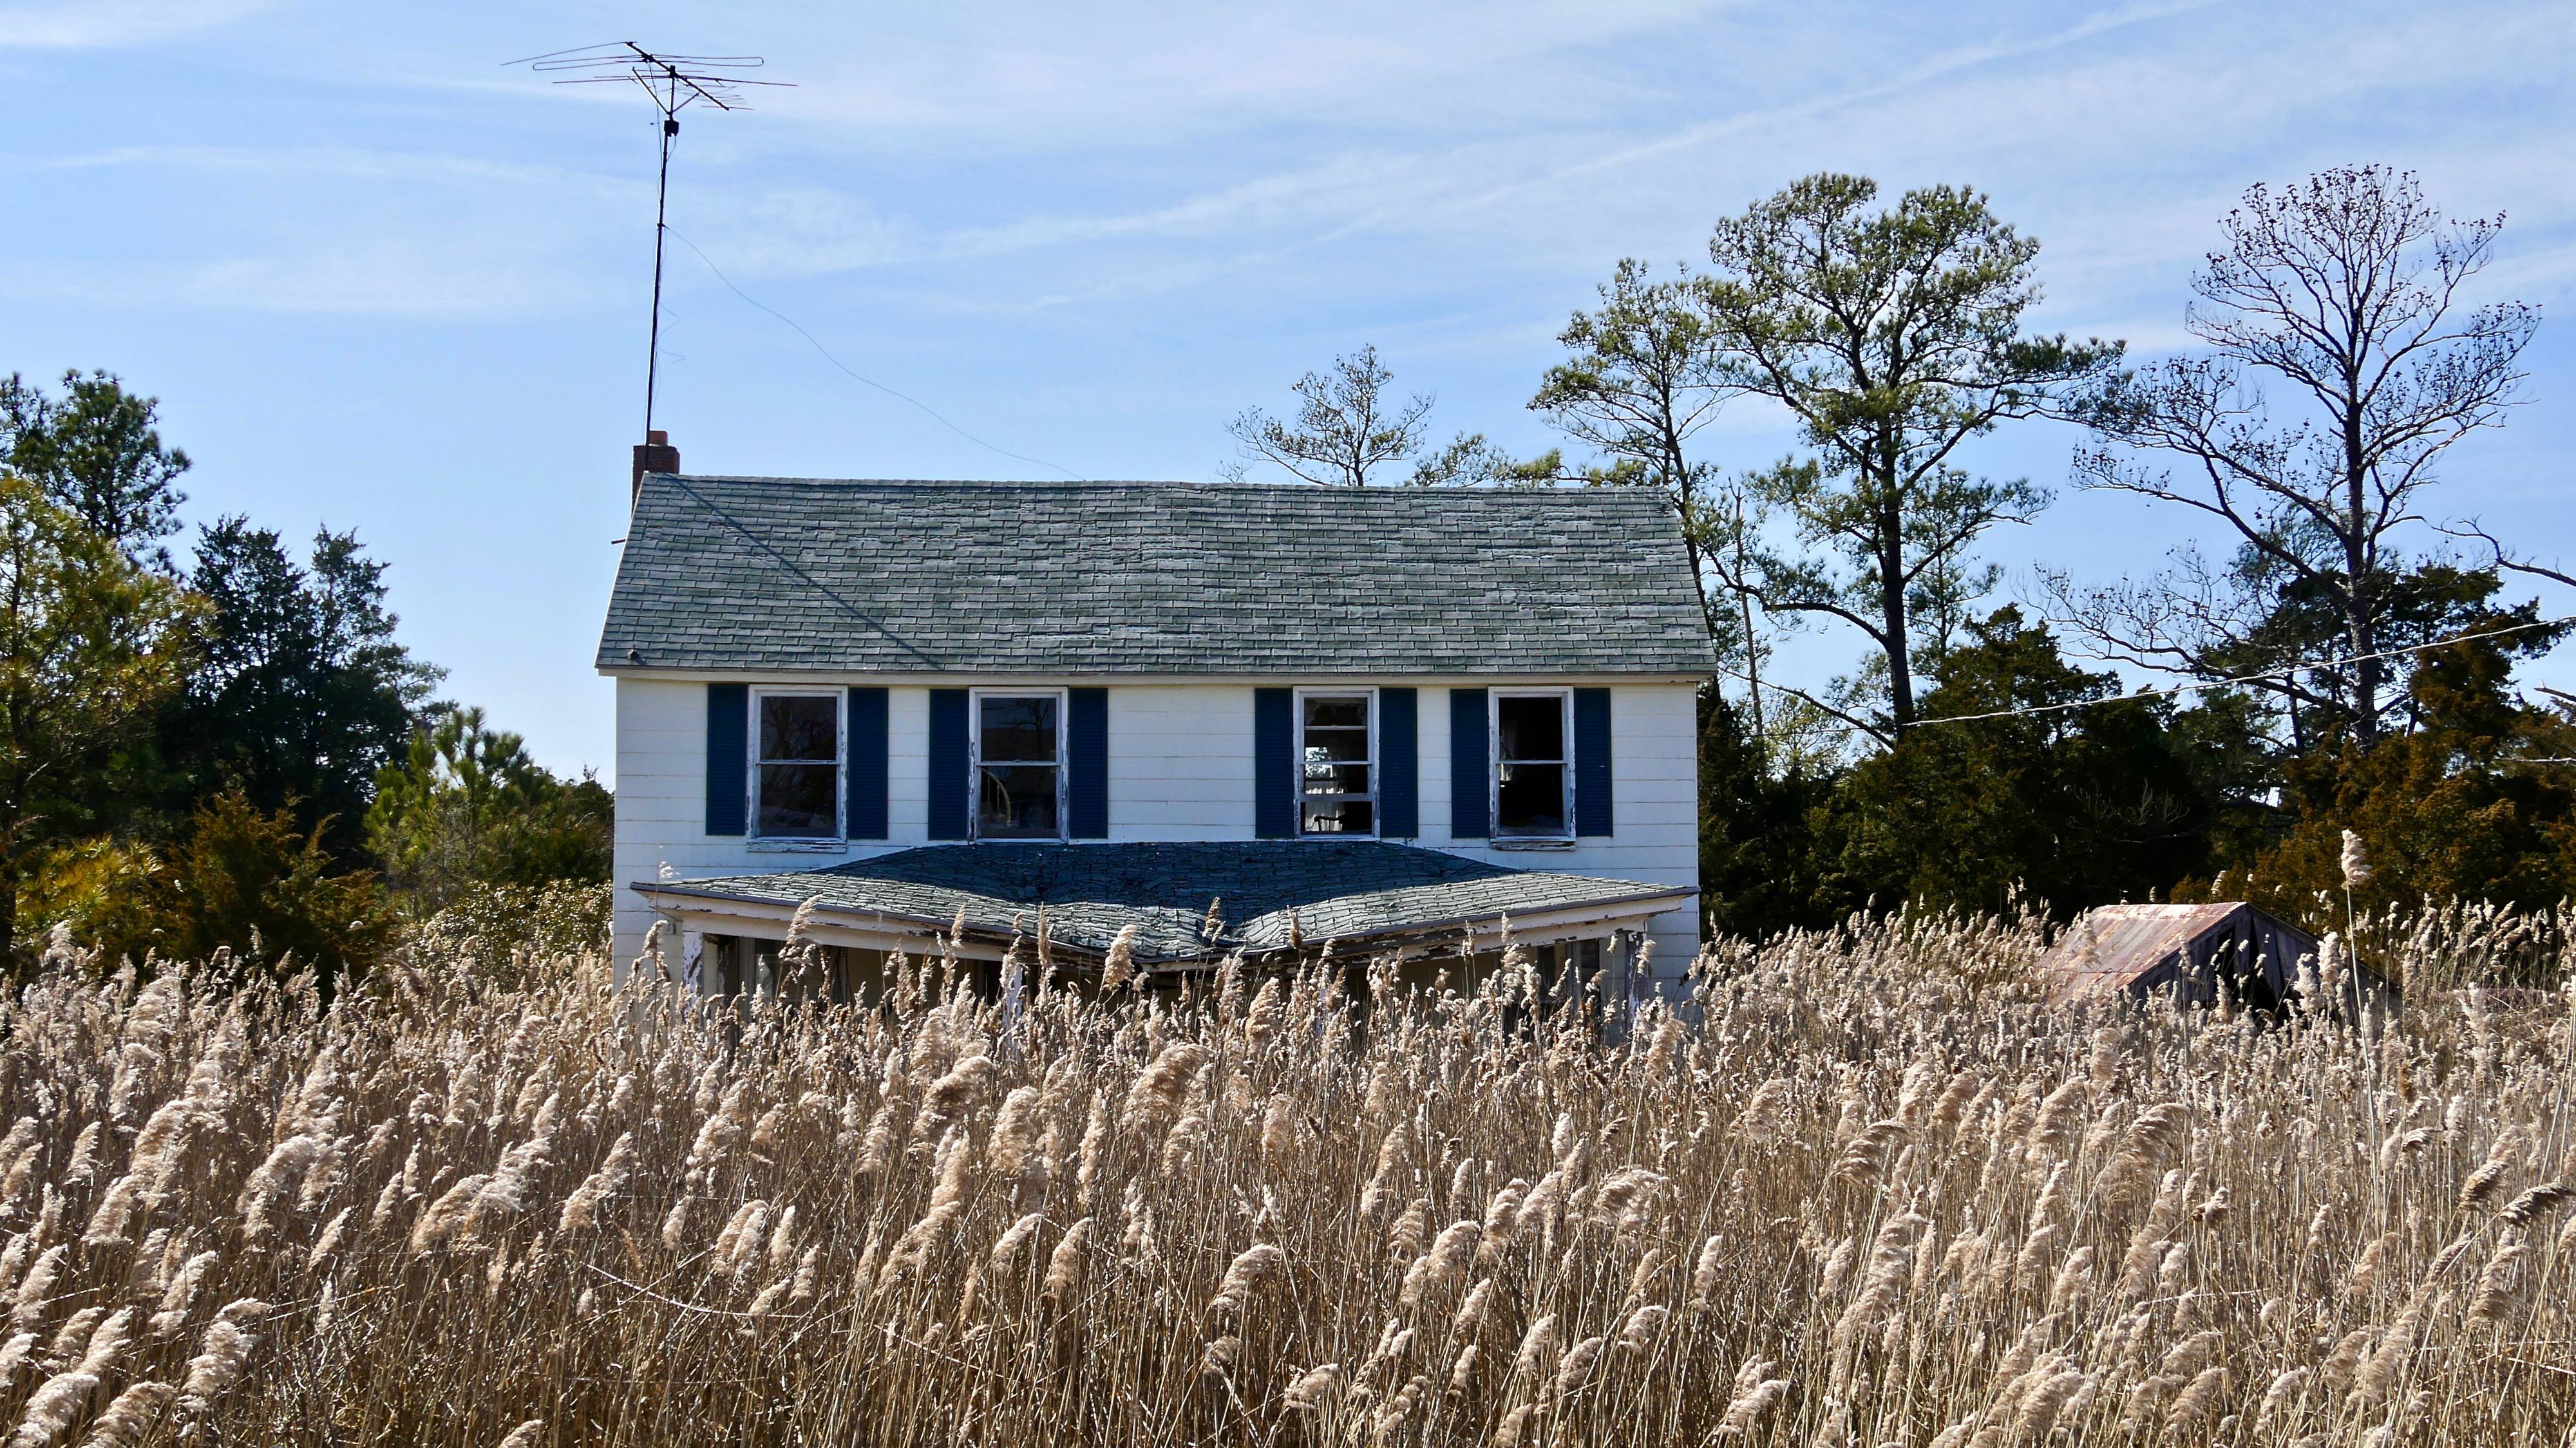 An abandoned house sits partially hidden by tall marsh grass. The windows are broken out and the porch roof is sagging in the middle.